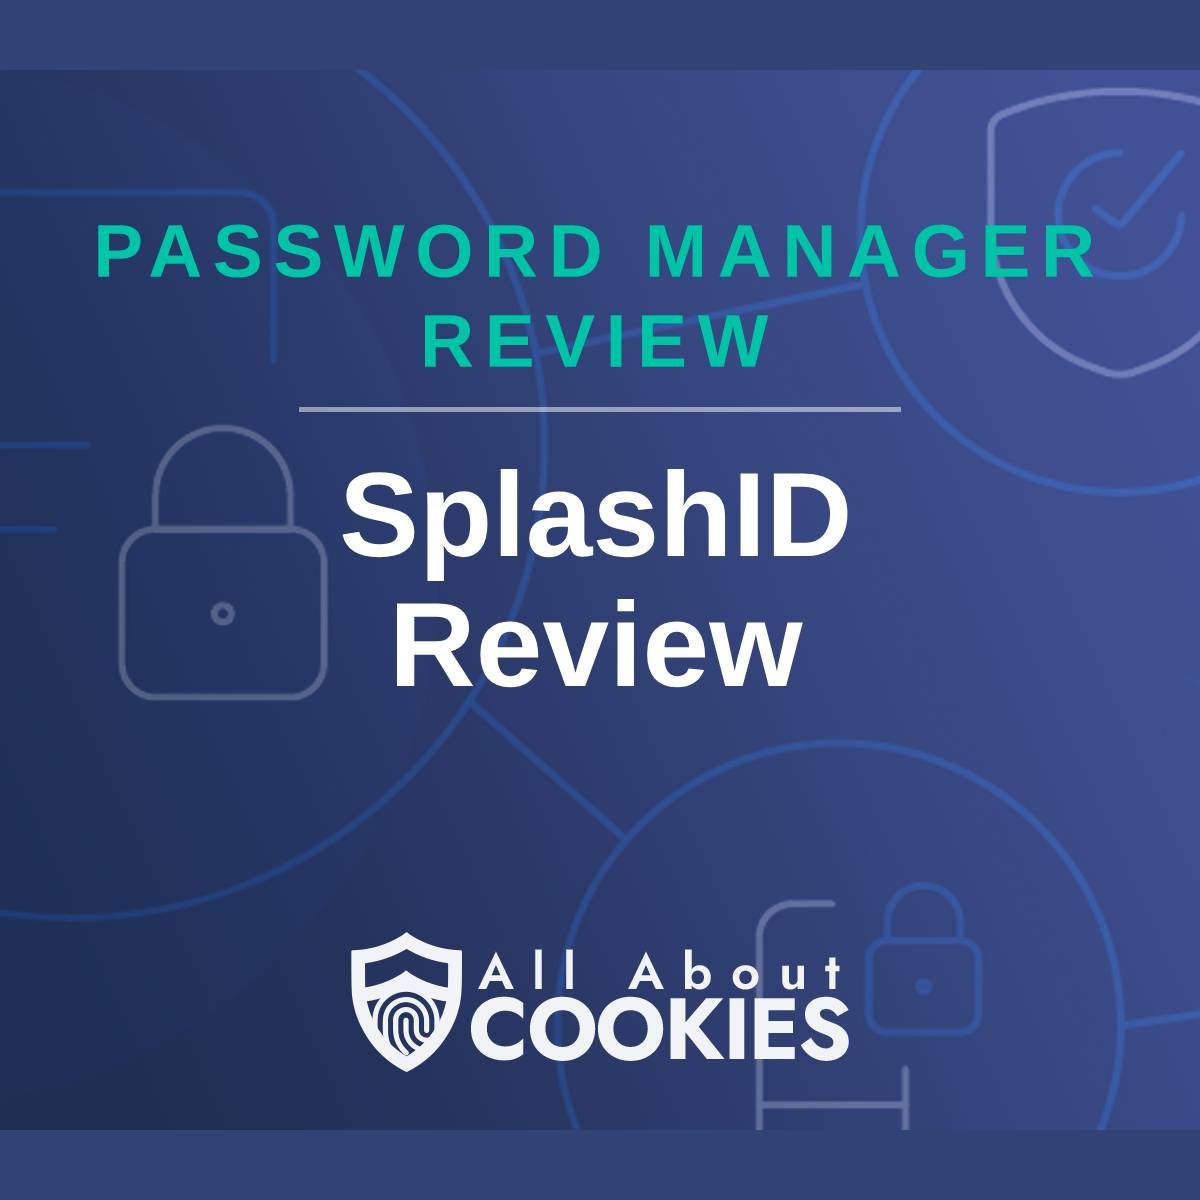 A blue background with images of locks and shields with the text &quot;Password Manager Review SplashID Review&quot; and the All About Cookies logo. 